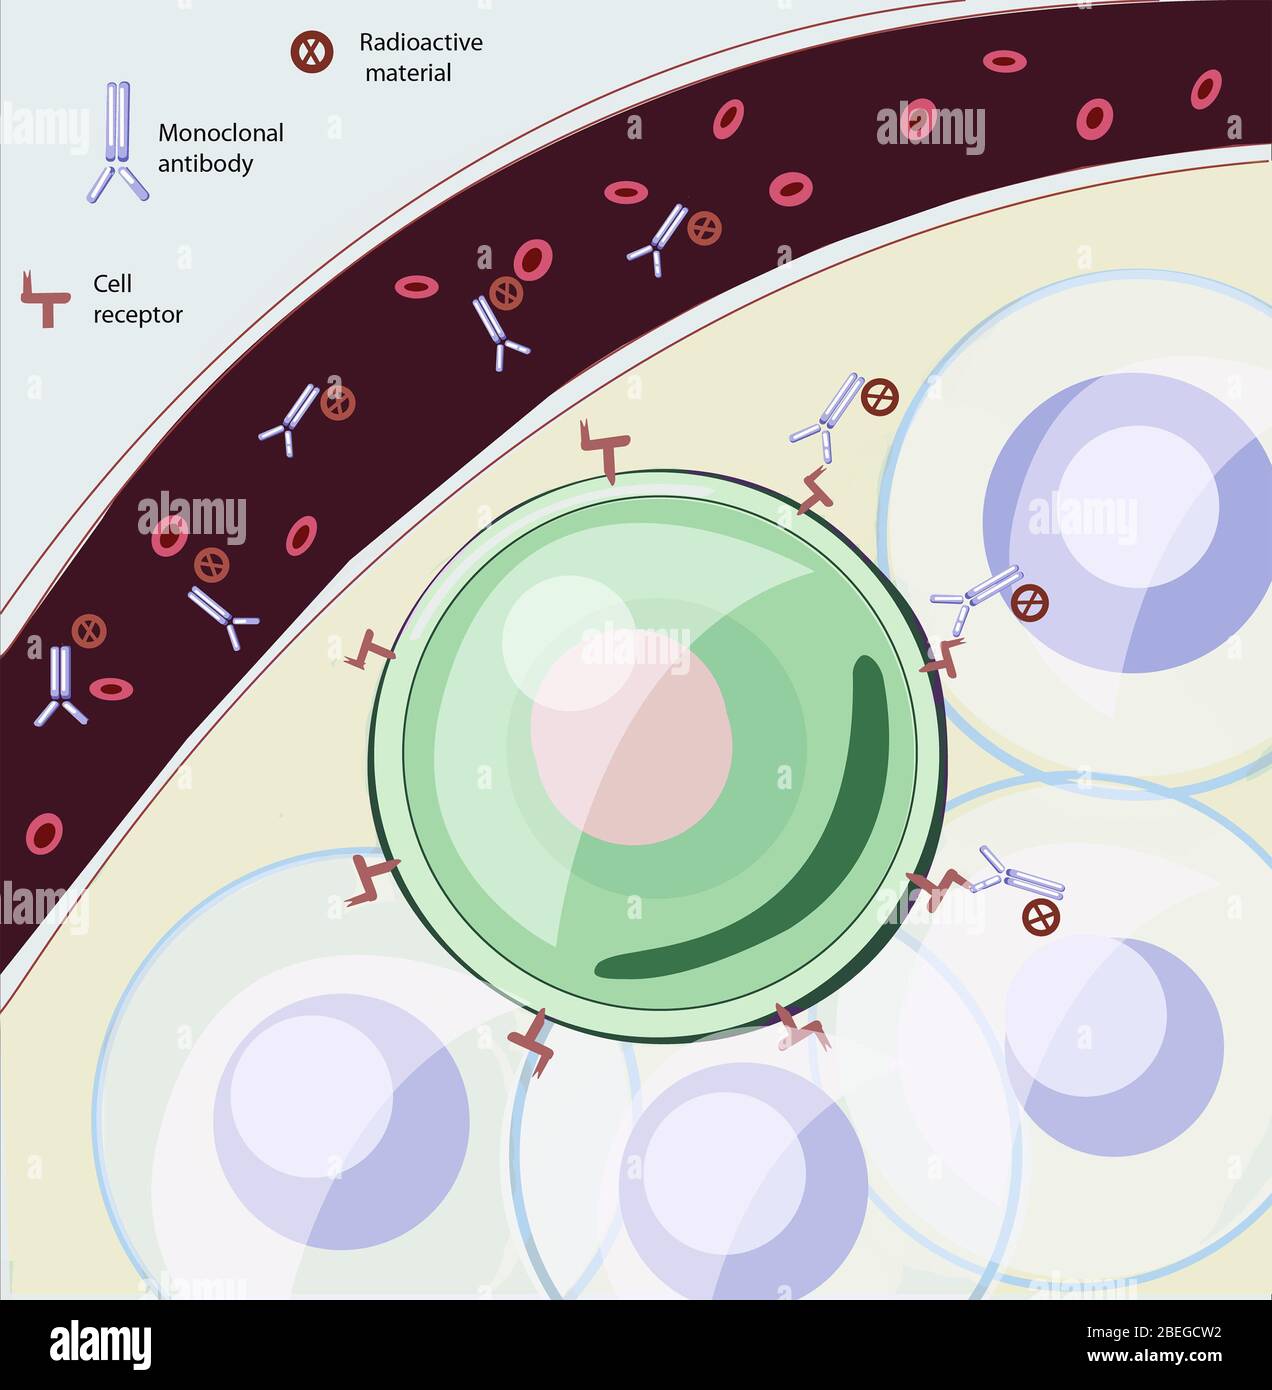 Illustration showing how radioimmunotherapy (RIT) works to kill tumors in the body. RIT uses engineered monoclonal antibodies paired with radioactive material.  These are injected into the bloodstream where they bind to cancer cells to deliver radiation directly to the tumor. Stock Photo